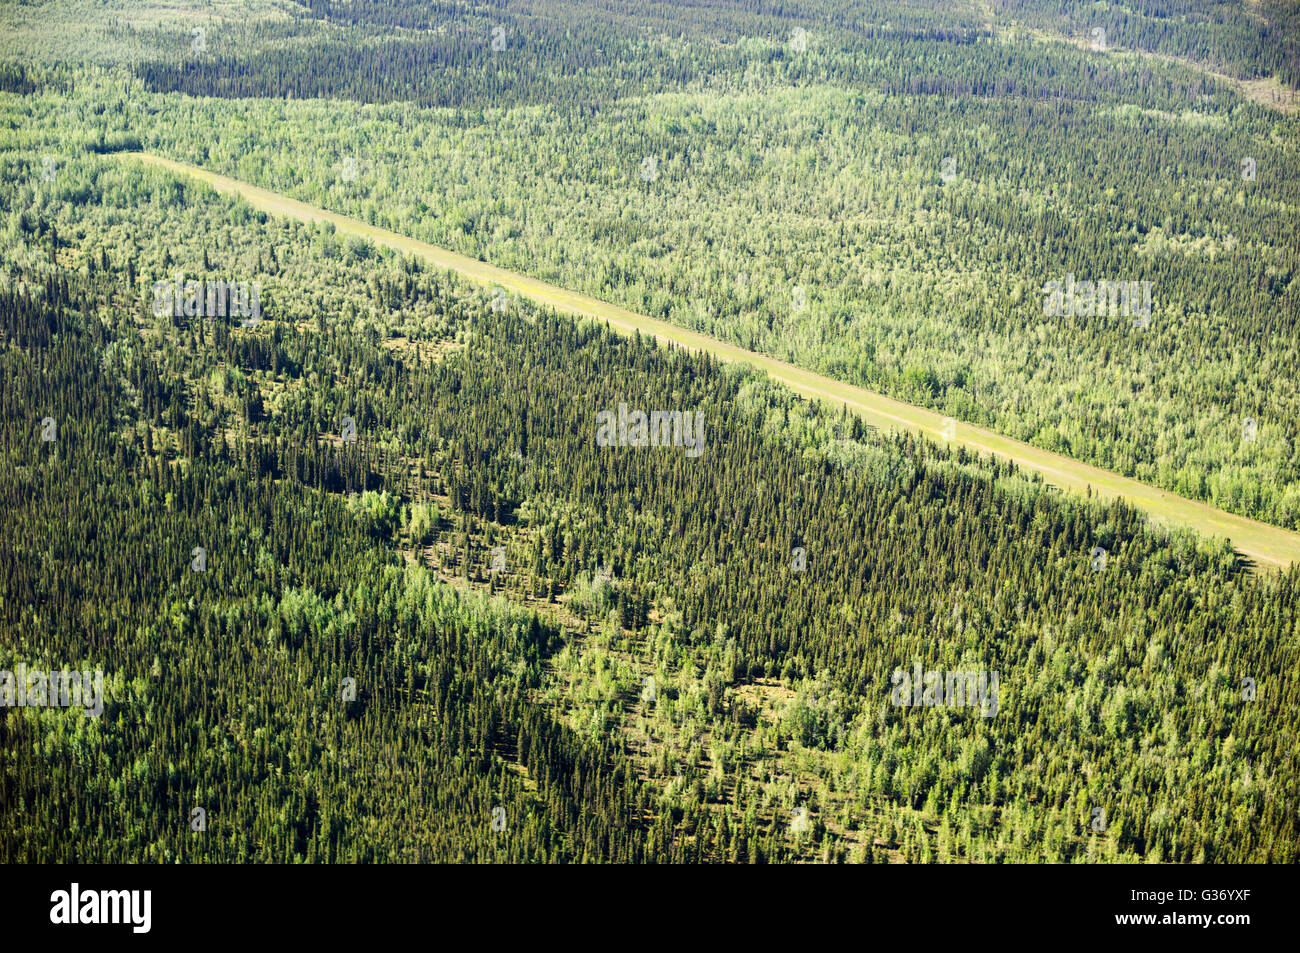 An aerial view of the May Creek Landing Strip located in the Wrangell Saint Elias National Park in Alaska USA. This remote landi Stock Photo